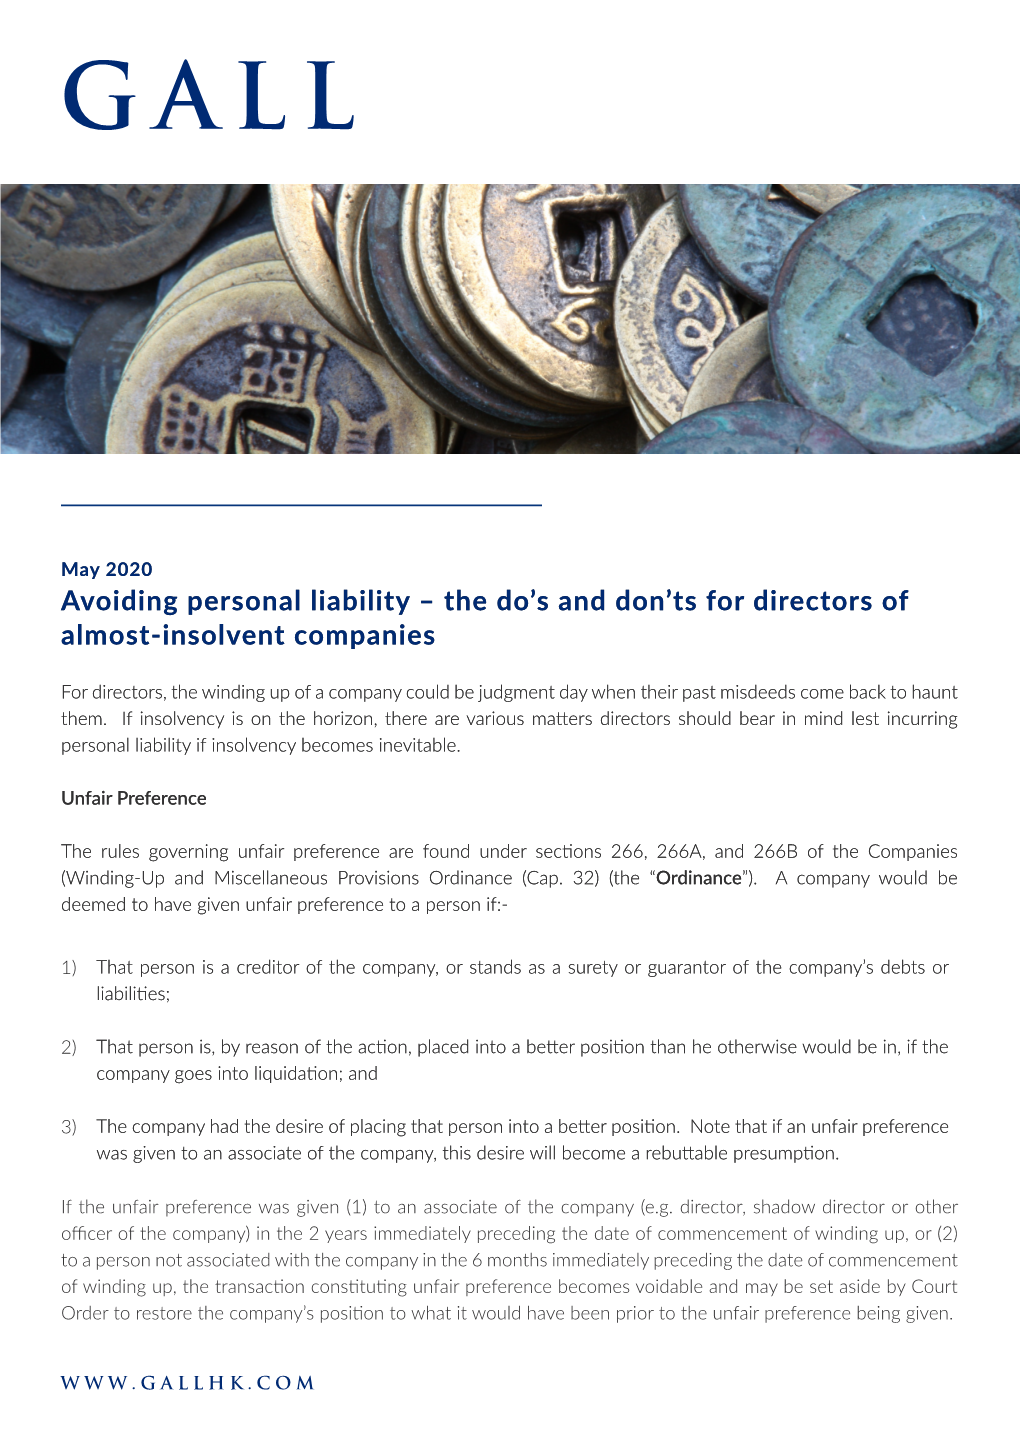 Avoiding Personal Liability – the Do’S and Don’Ts for Directors of Almost-Insolvent Companies